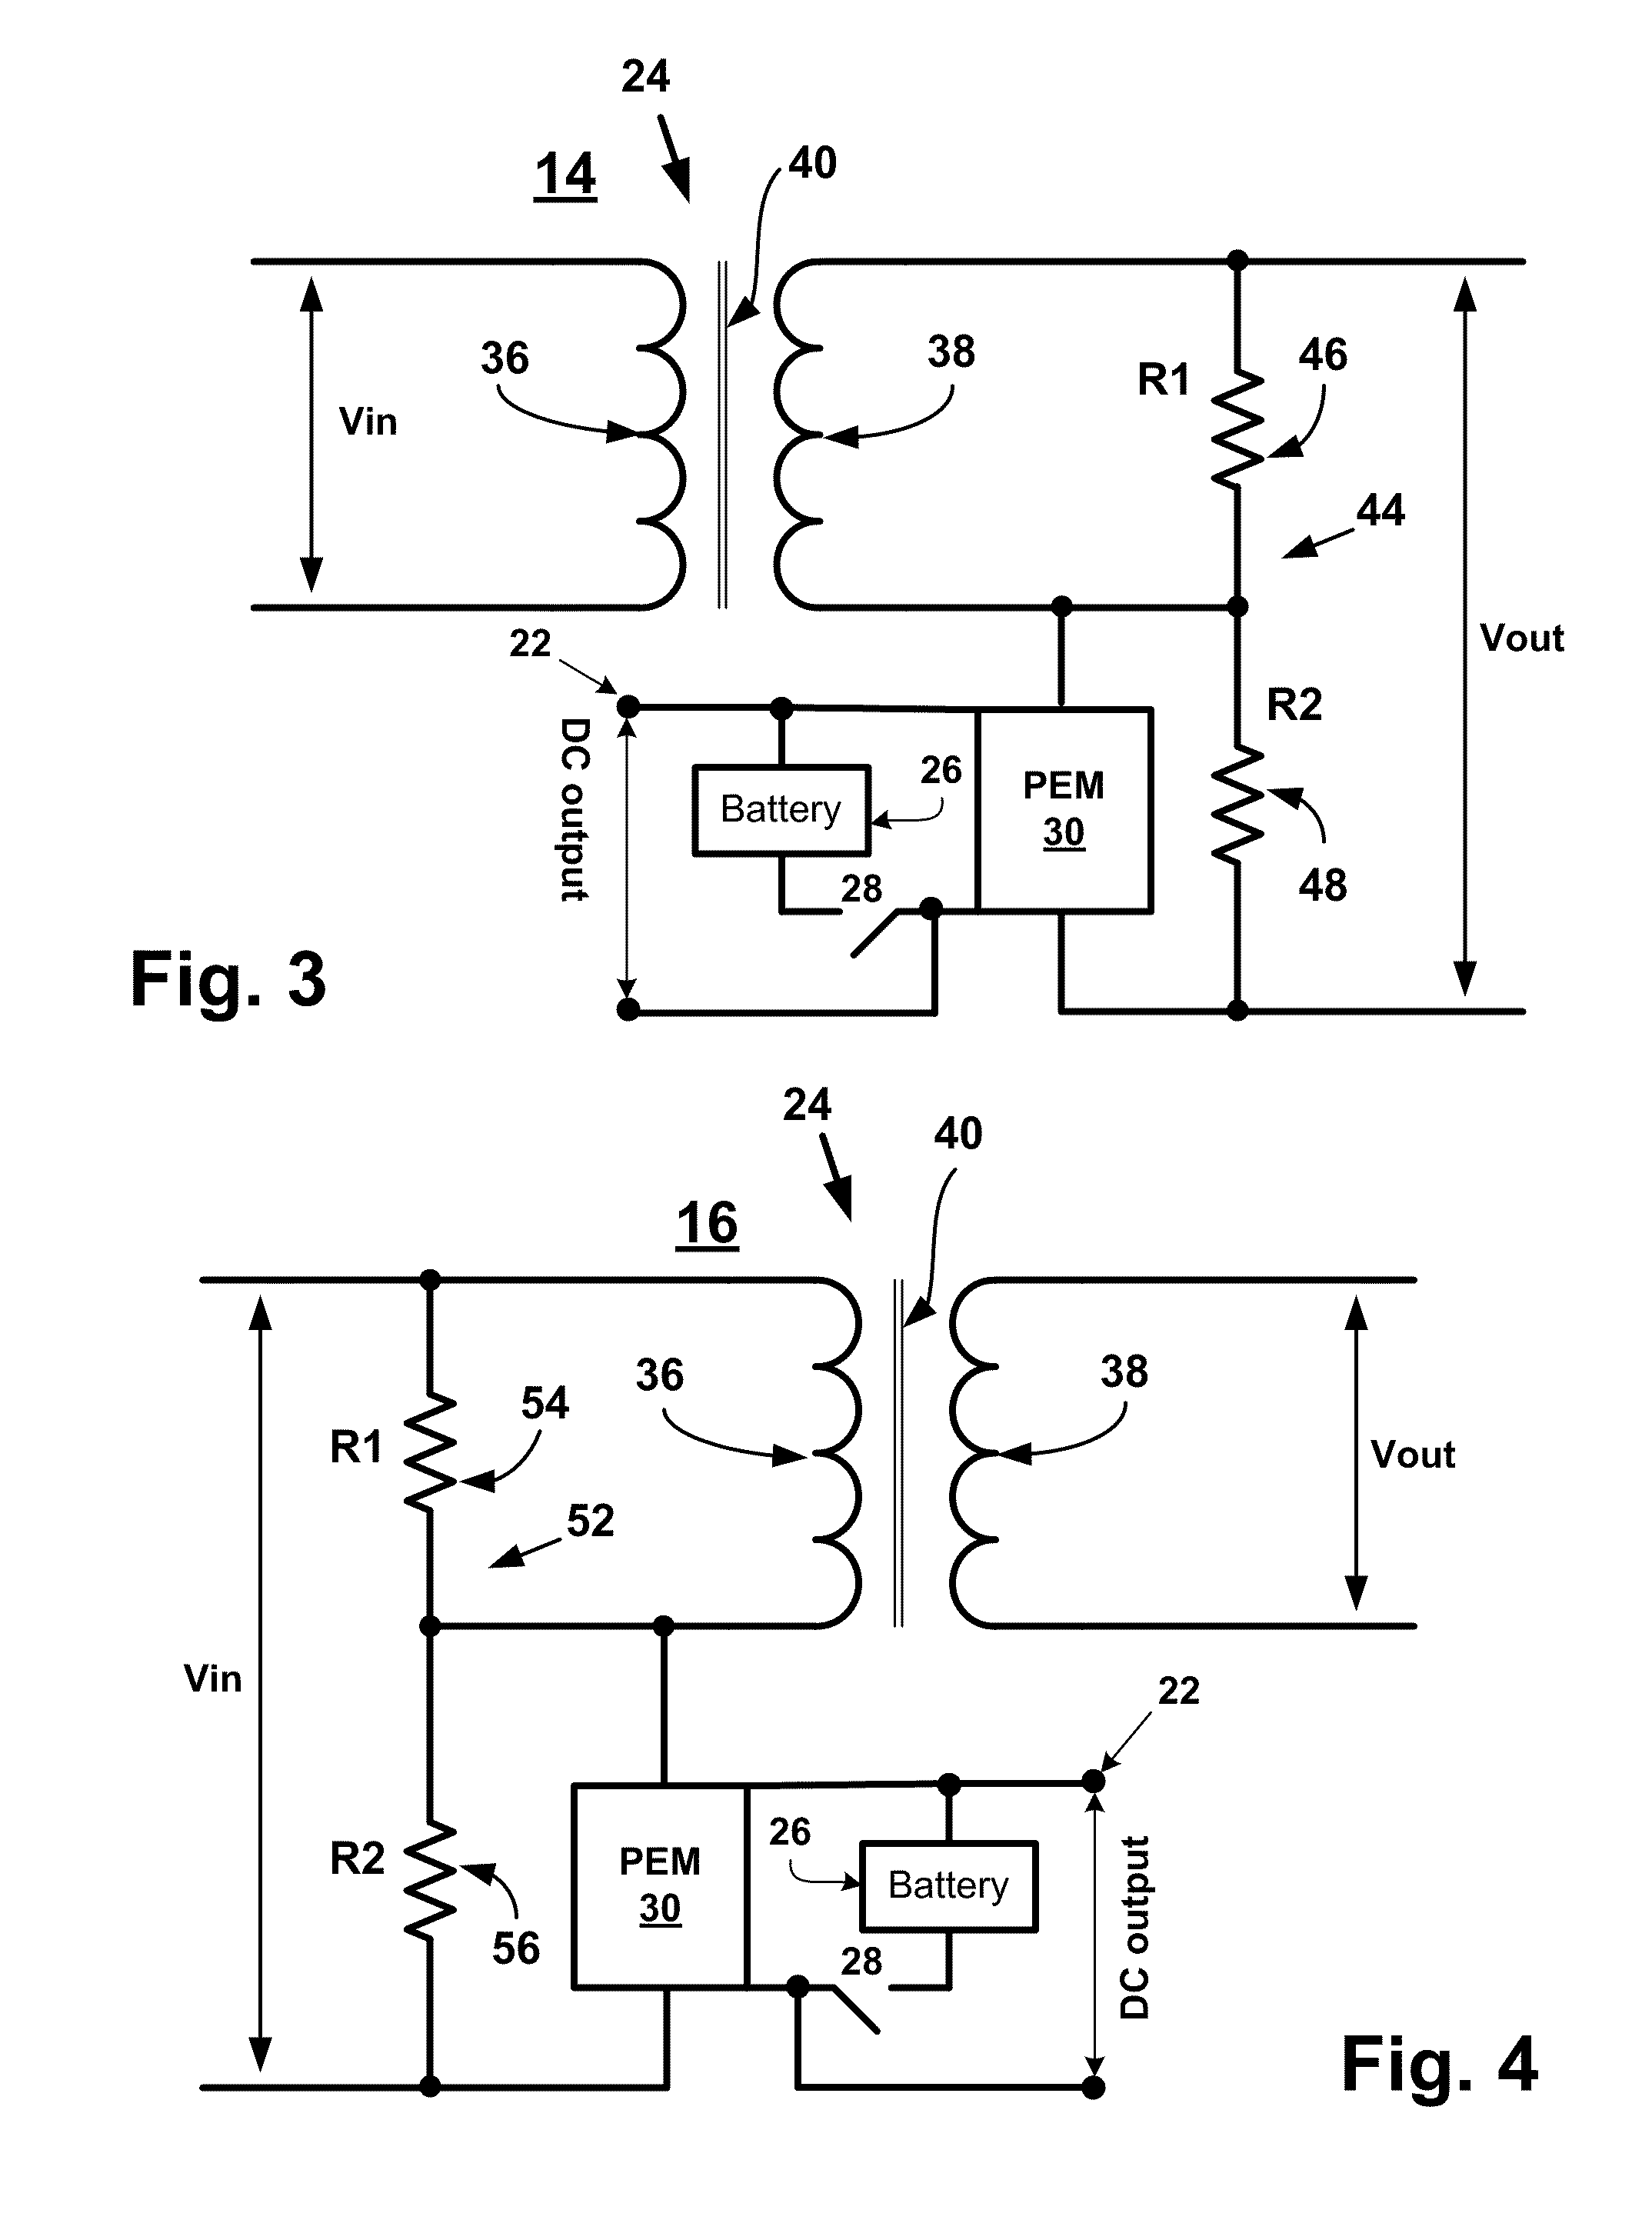 Hybrid distribution transformer with an integrated voltage source converter